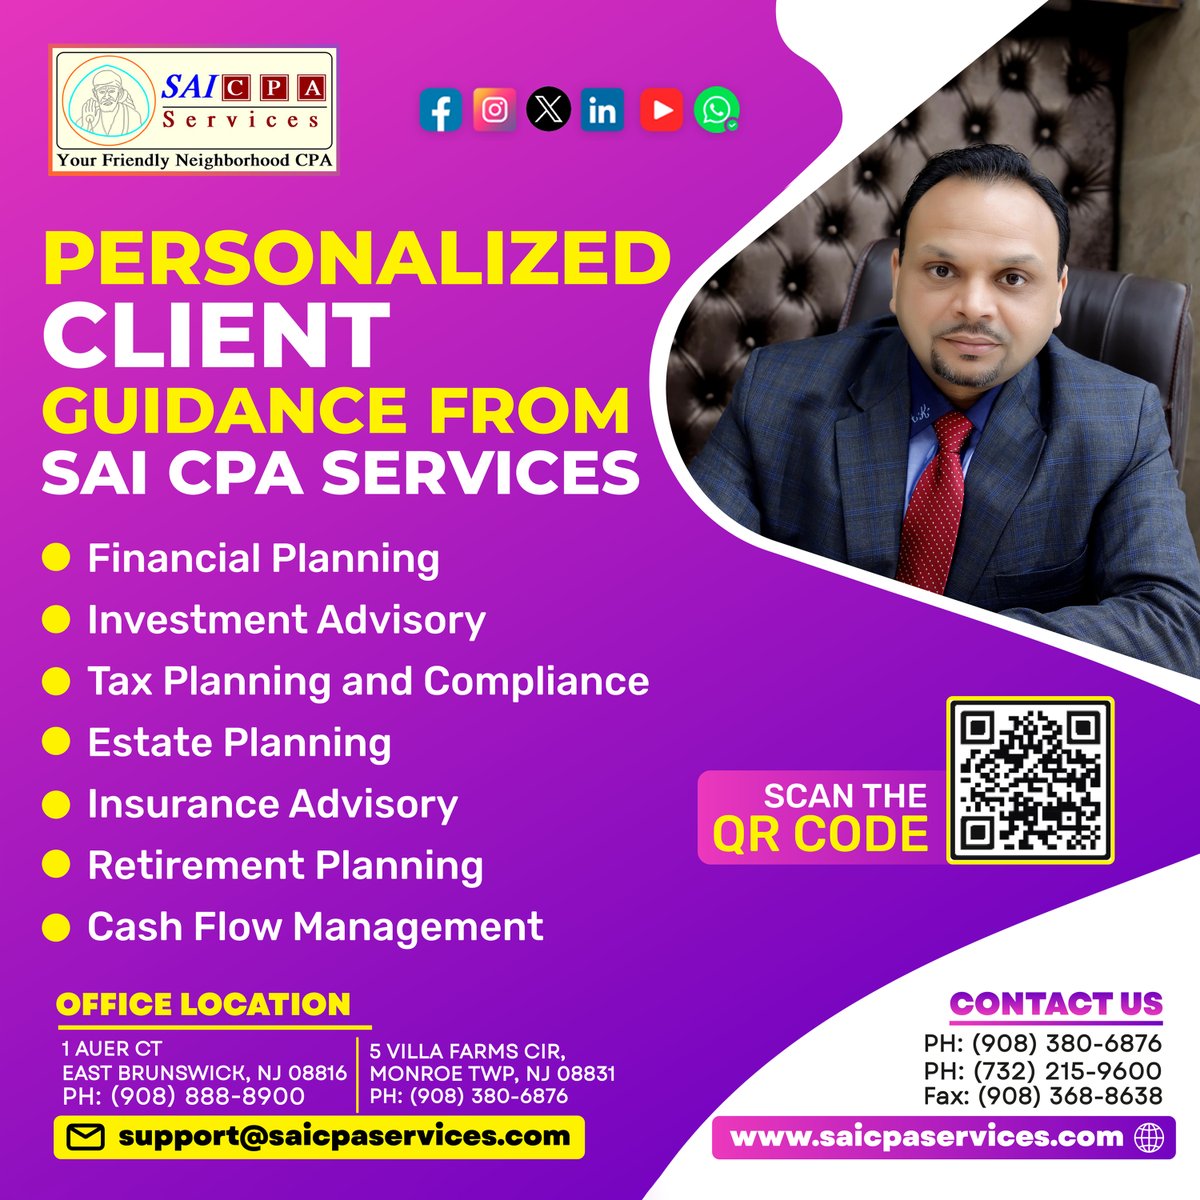 Tailored financial guidance for you : SAI CPA SERVICES
Contact Us: saicpaservices.com
(908) 380-6876
#FinancialPlanning #InvestmentAdvice #TaxCompliance #EstatePlanning #Insurance #RetirementPlanning #CashFlowManagement #SaiCPAServices